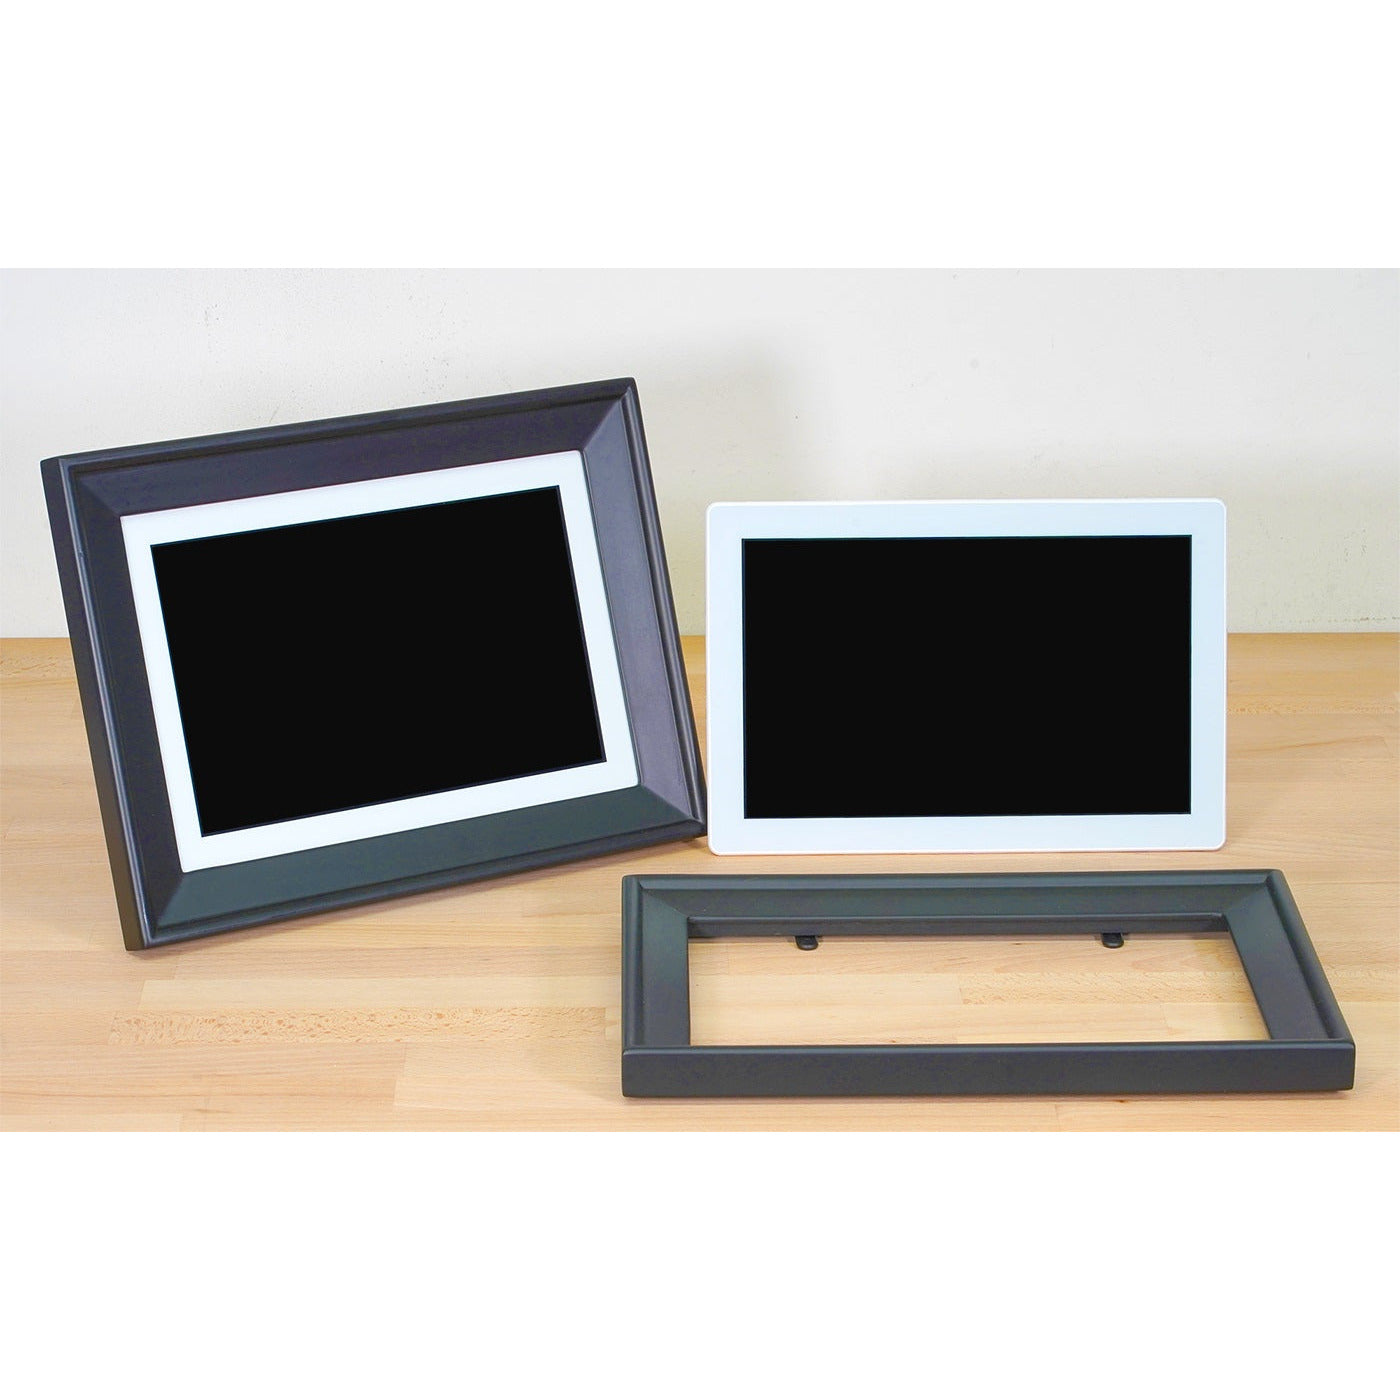 Black Replacement Frame Moulding